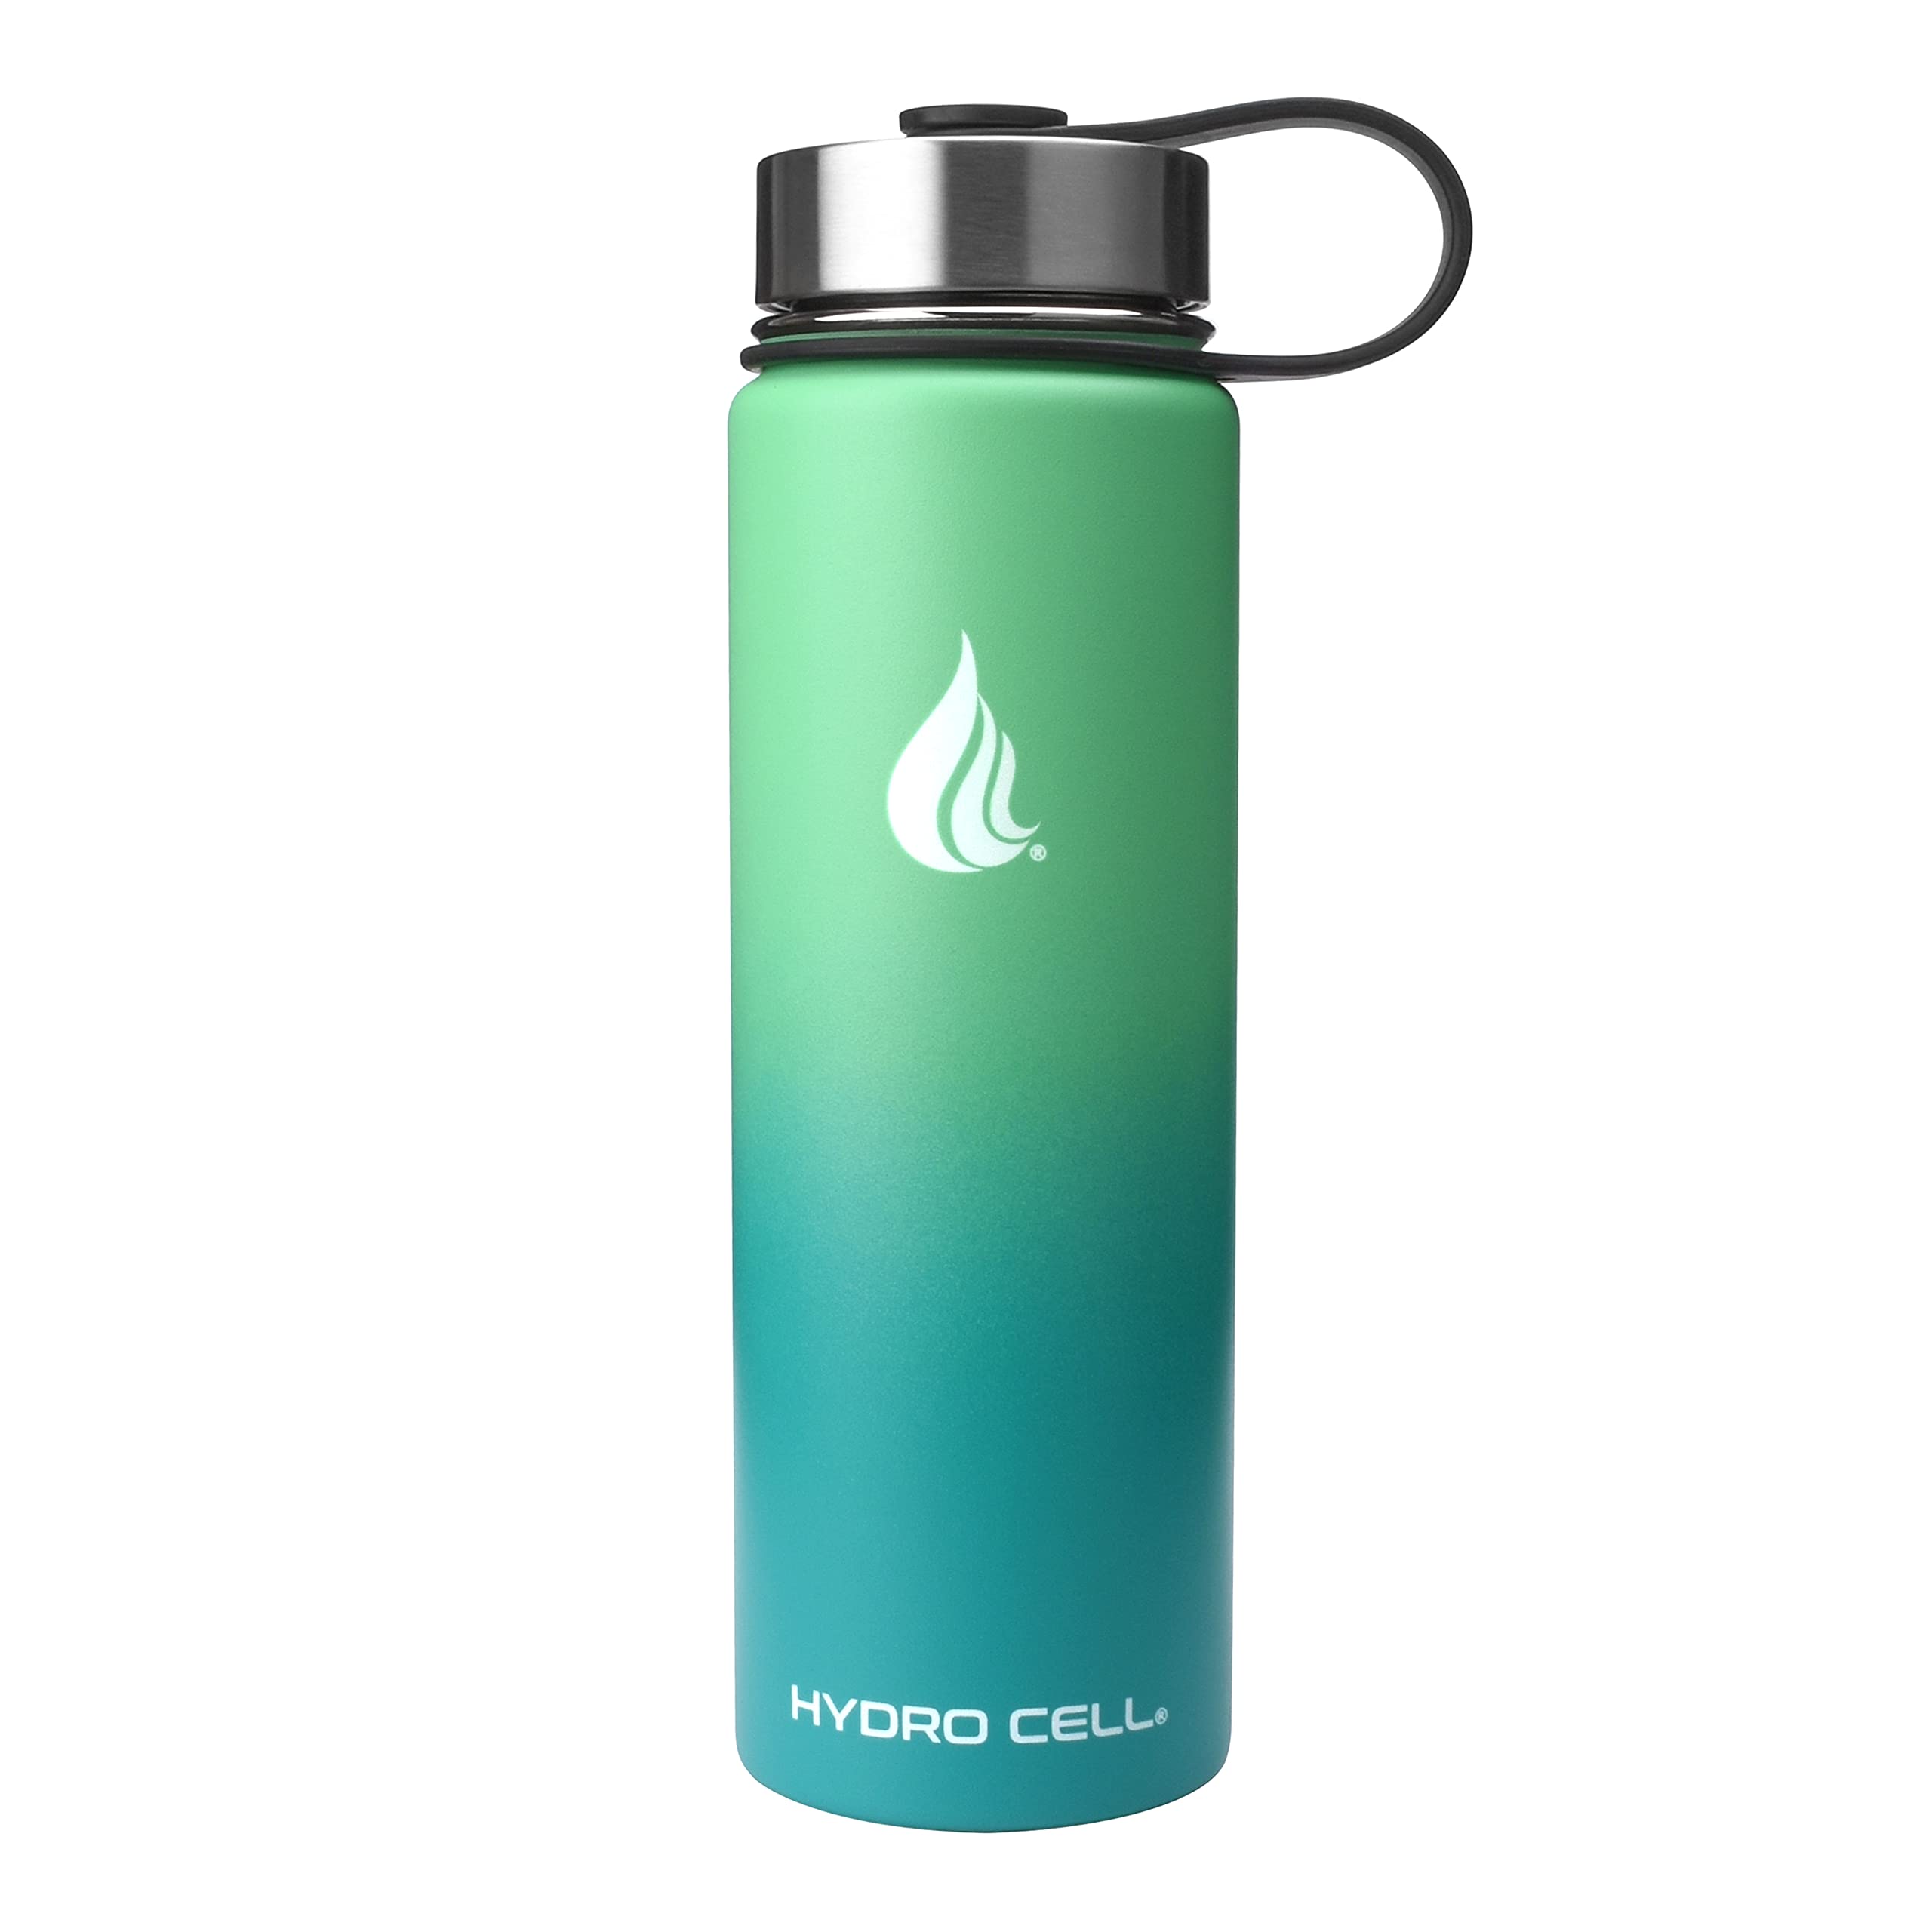 HYDRO CELL Stainless Steel Insulated Water Bottle with Straw - For Cold & Hot Drinks - Metal Vacuum Flask with Screw Cap and Modern Leakproof Sport Thermos for Kids & Adults (Mint/Green 24oz)